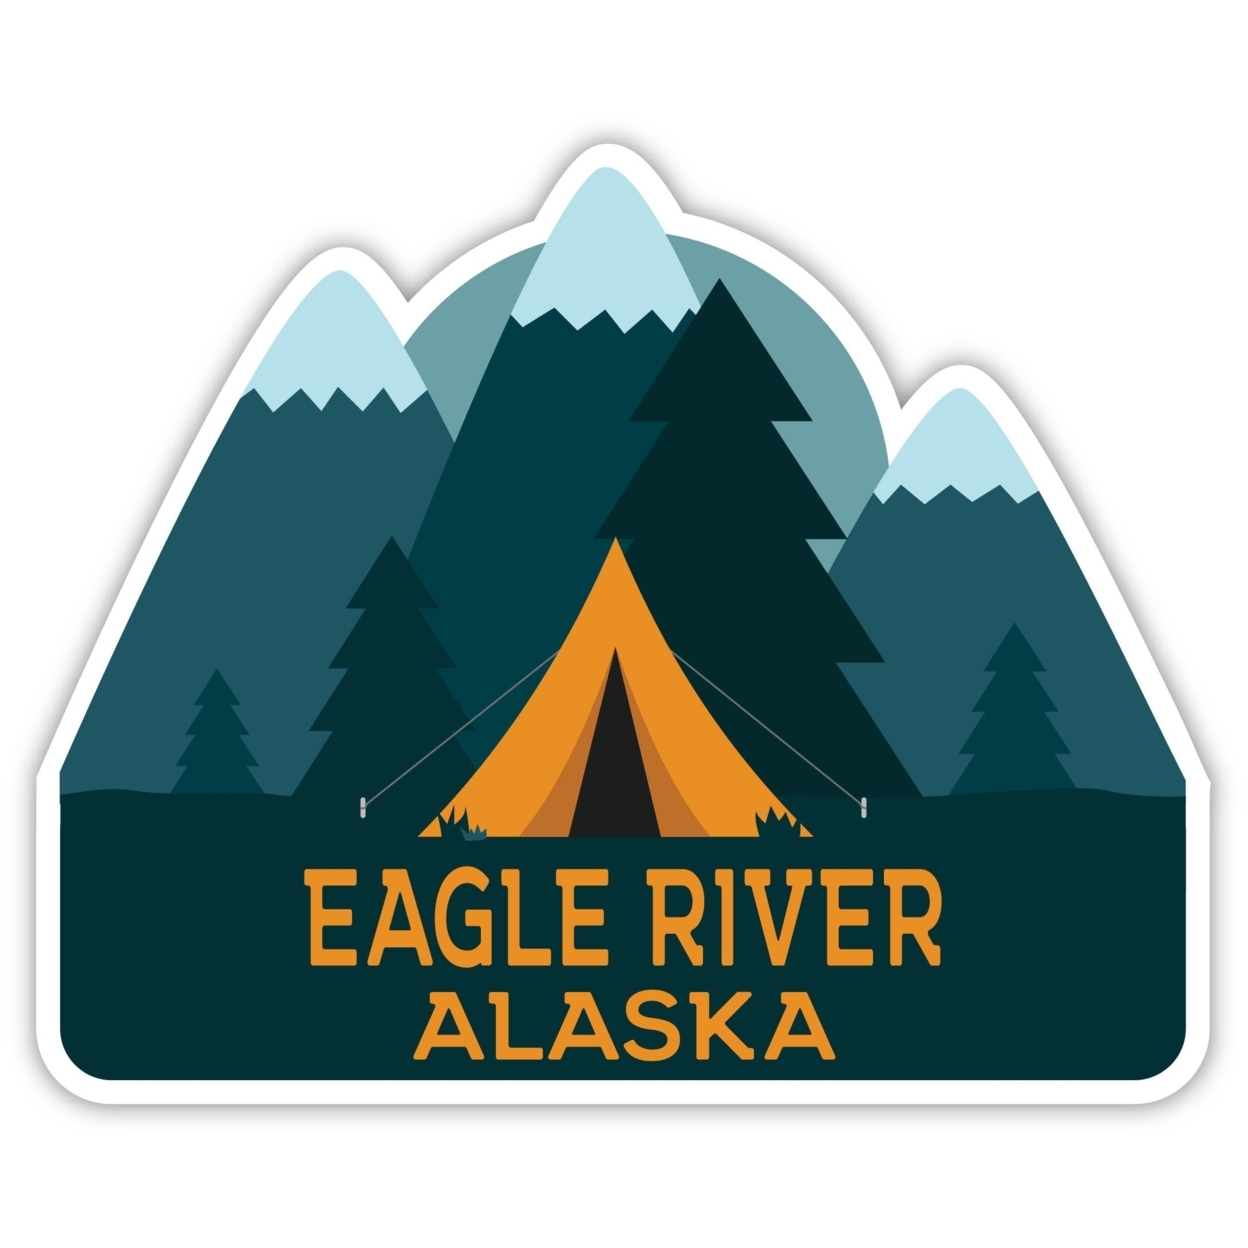 Eagle River Alaska Souvenir Decorative Stickers (Choose Theme And Size) - 4-Pack, 2-Inch, Great Outdoors